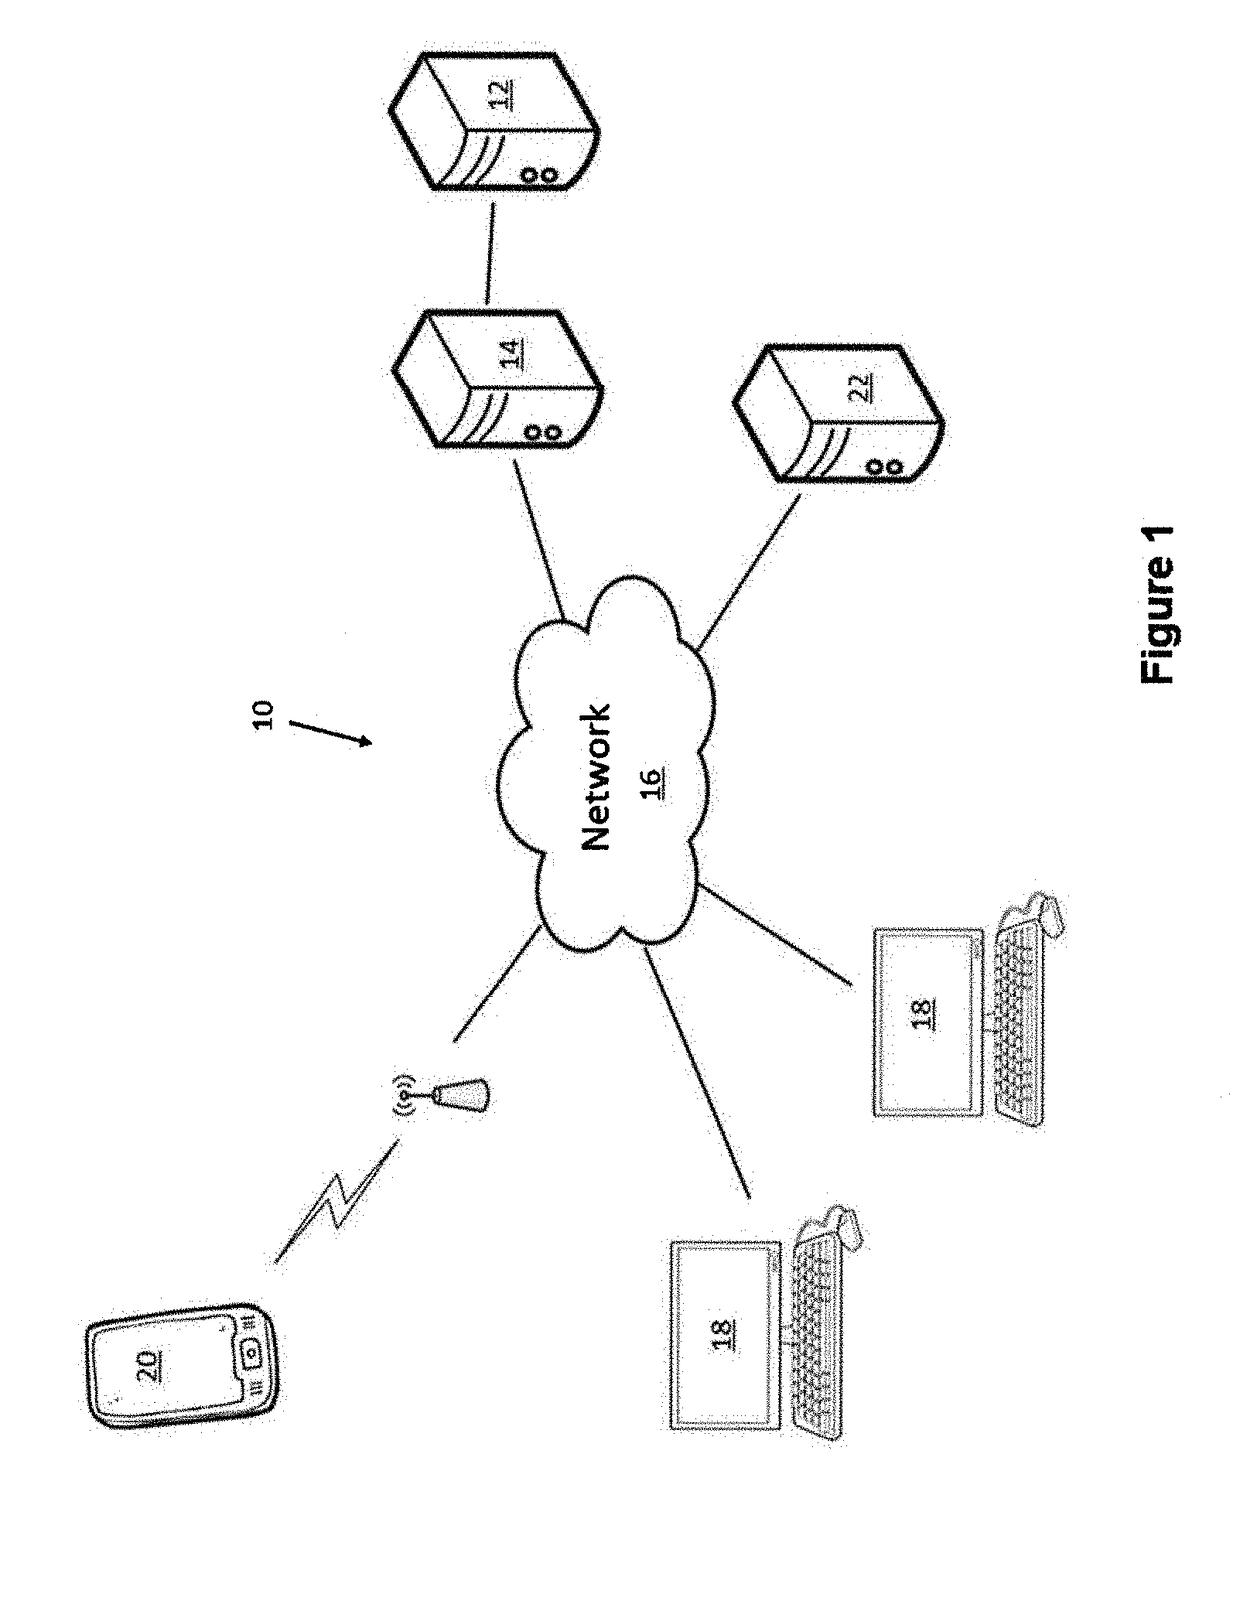 Systems and methods for providing an integrated public and/or private transportation service